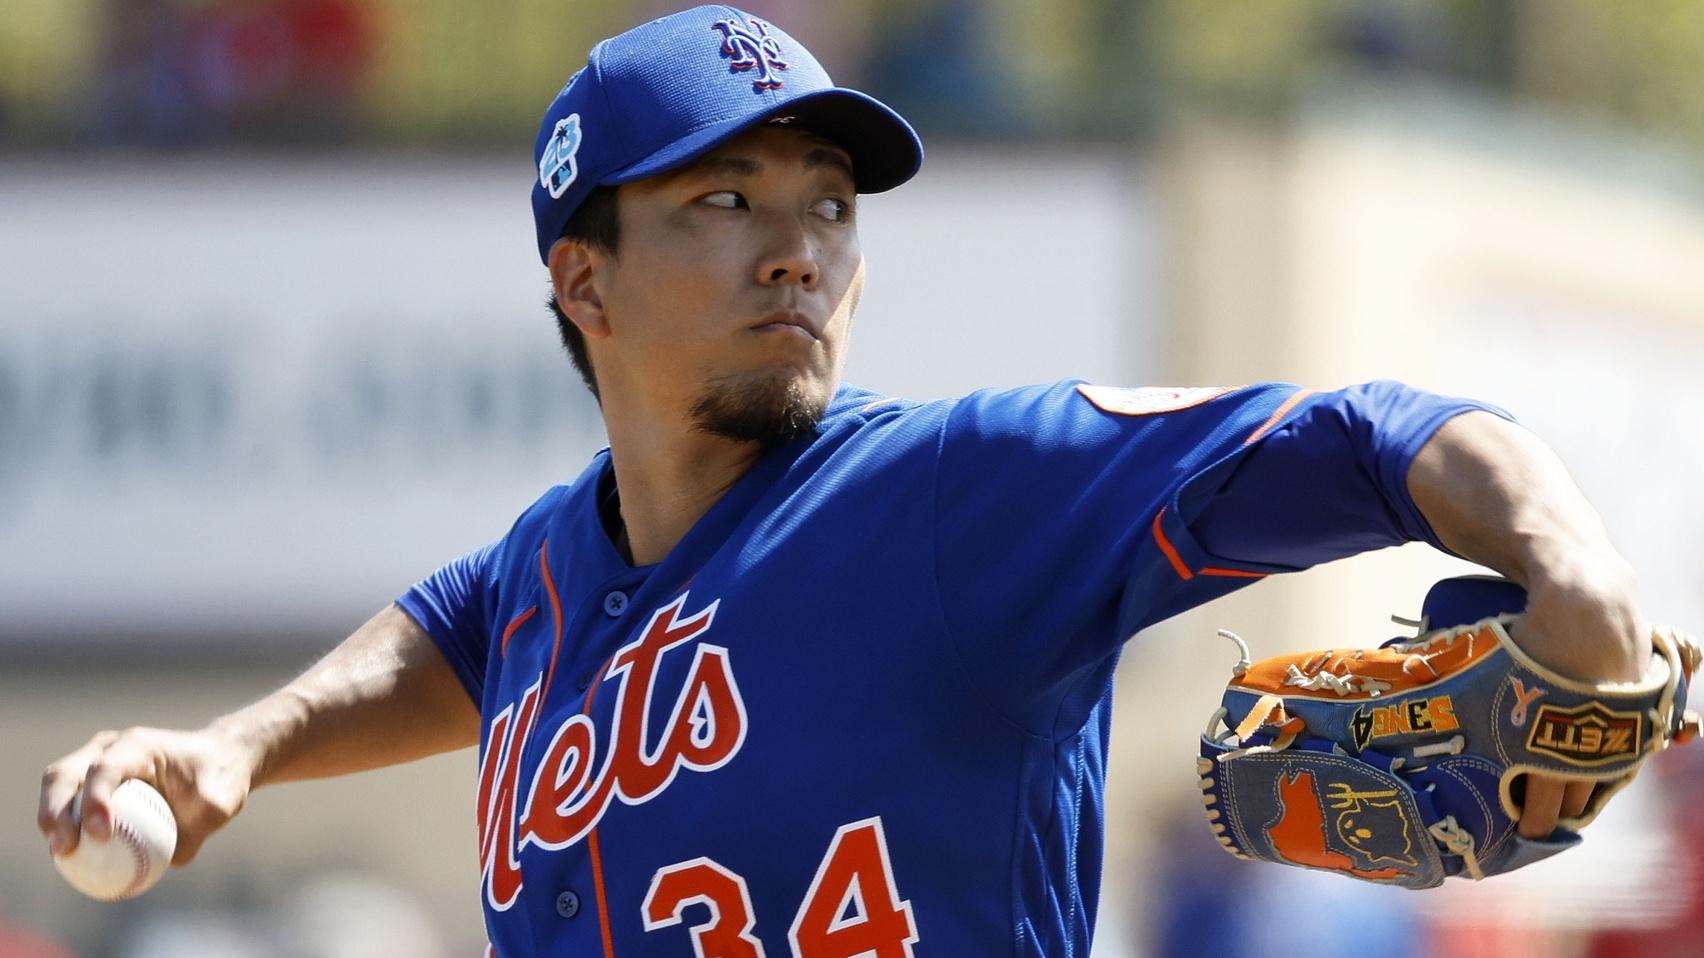 Mar 5, 2023; Jupiter, Florida, USA; New York Mets starting pitcher Kodai Senga (34) pitches against the St. Louis Cardinals in the first inning at Roger Dean Stadium. / Rhona Wise-USA TODAY Sports